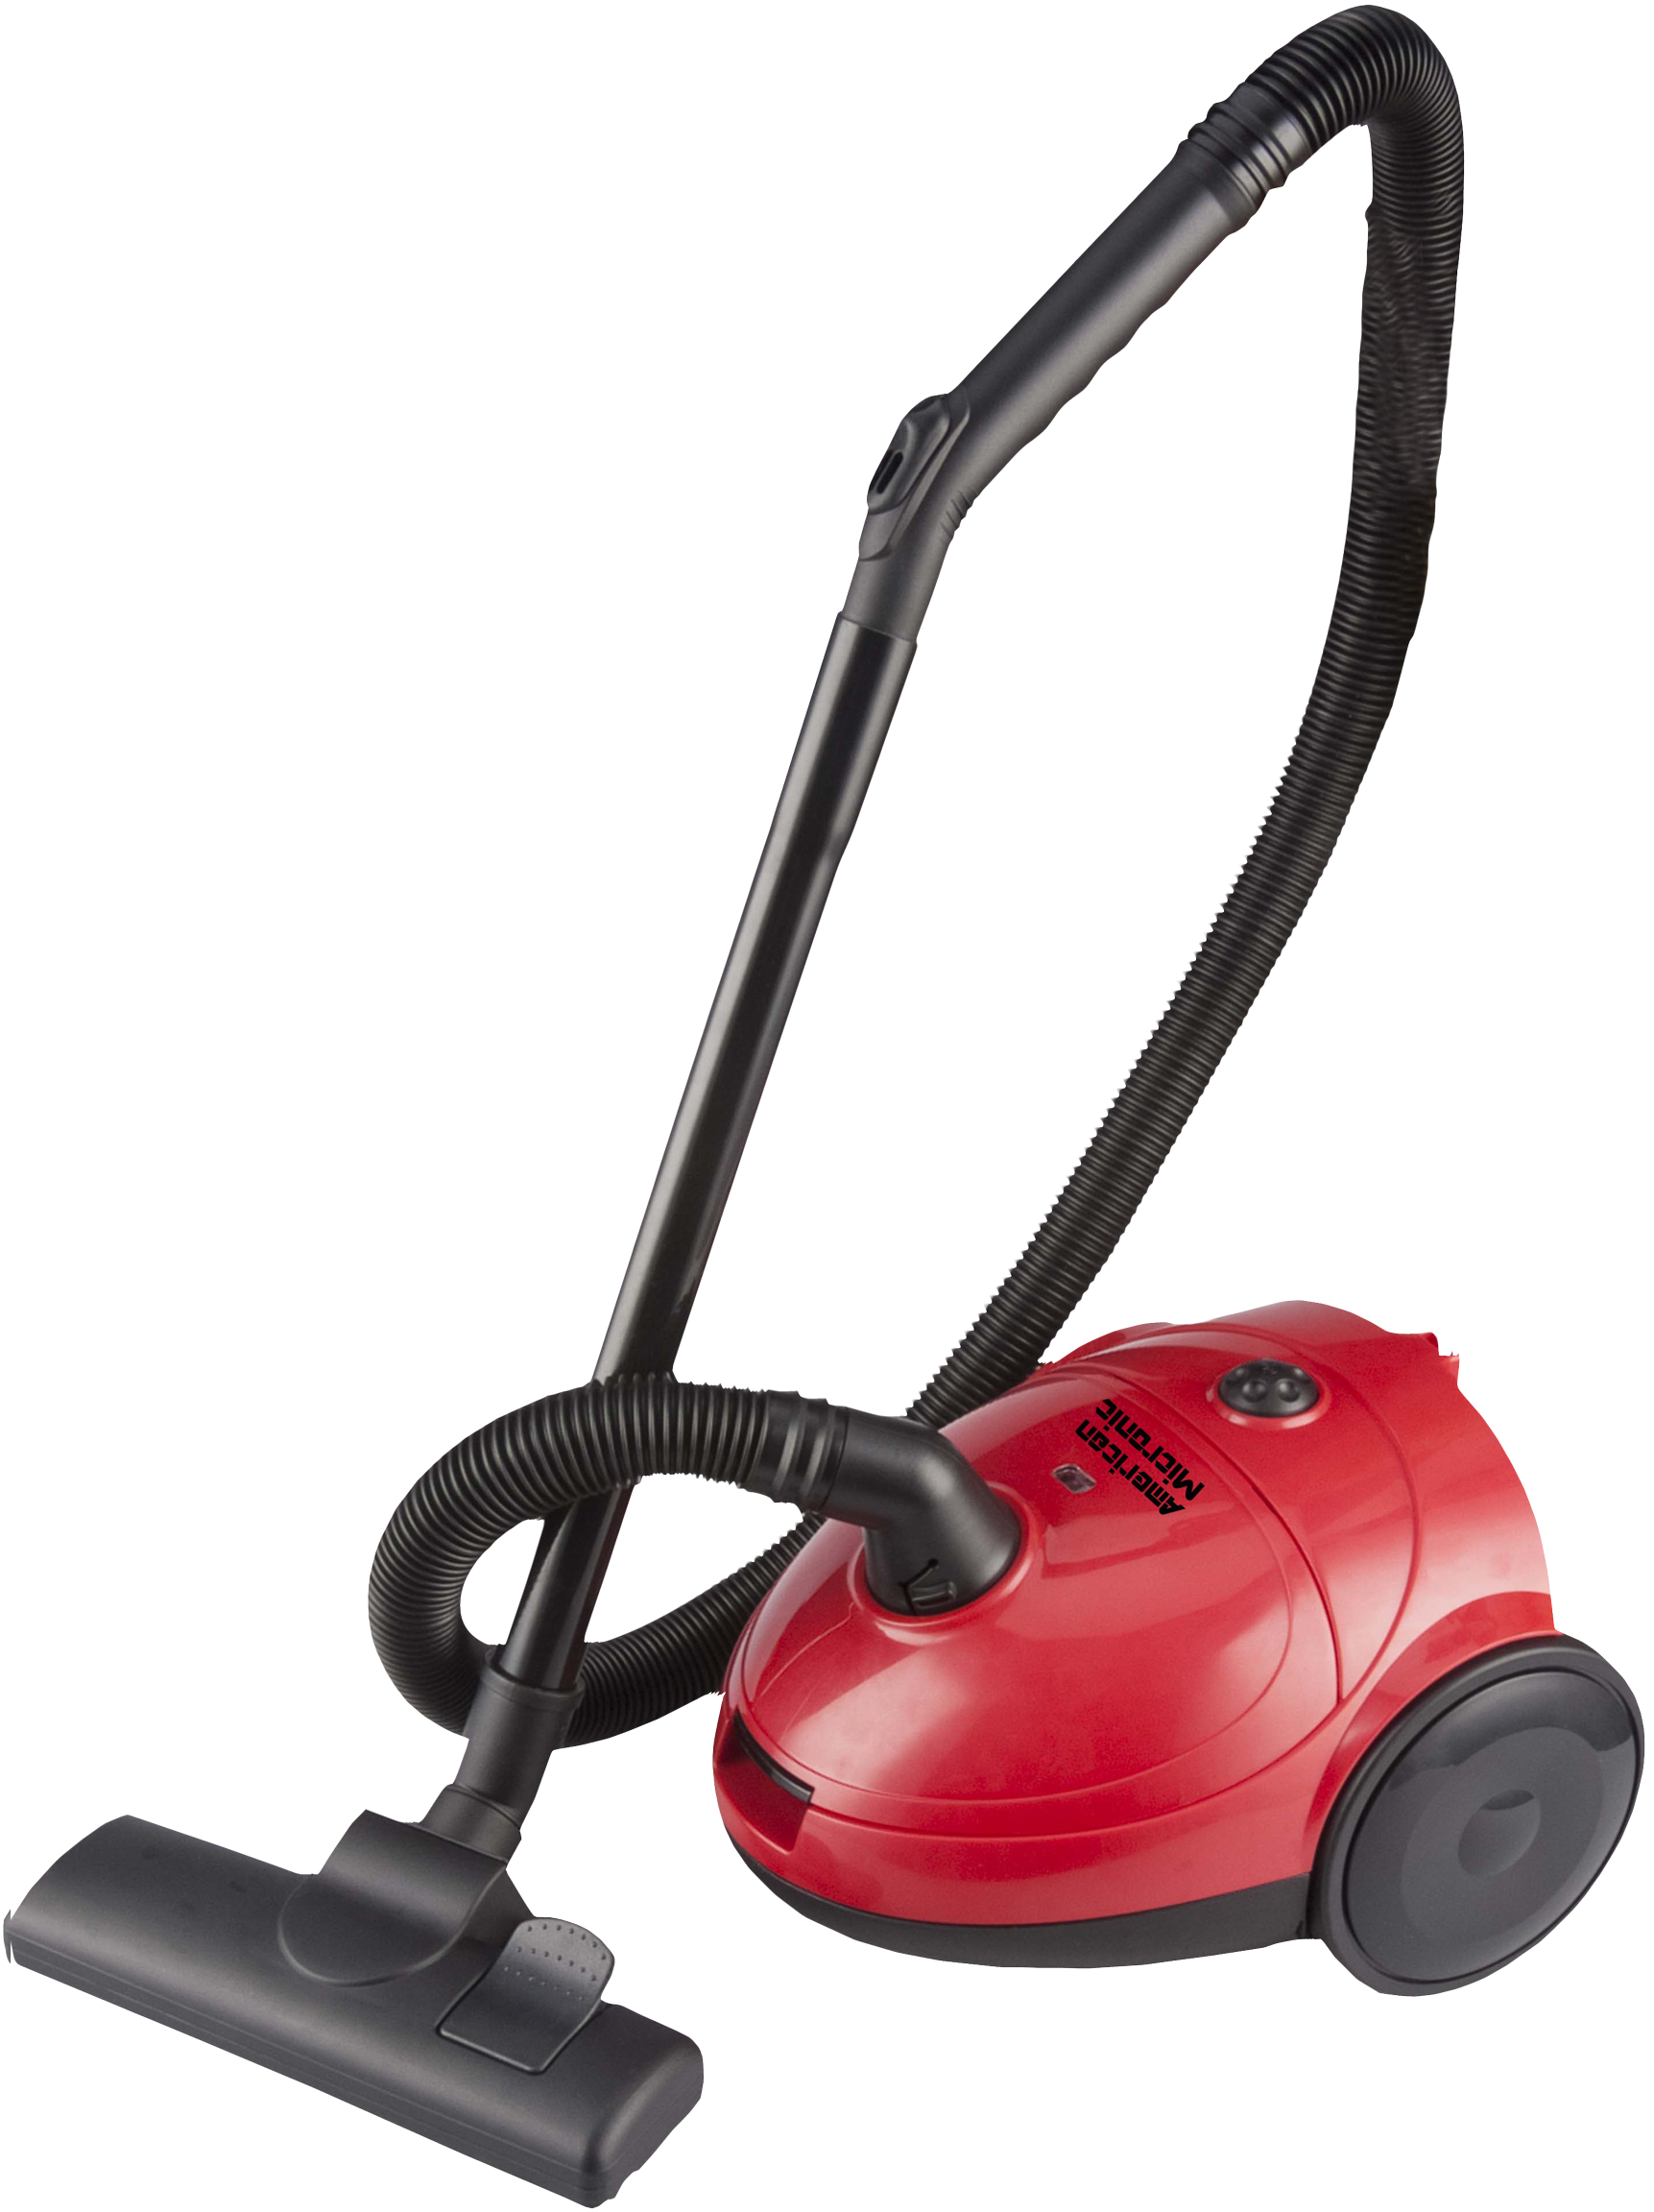 Office Vacuum Cleaner PNG Image - PurePNG | Free transparent CC0 PNG ...